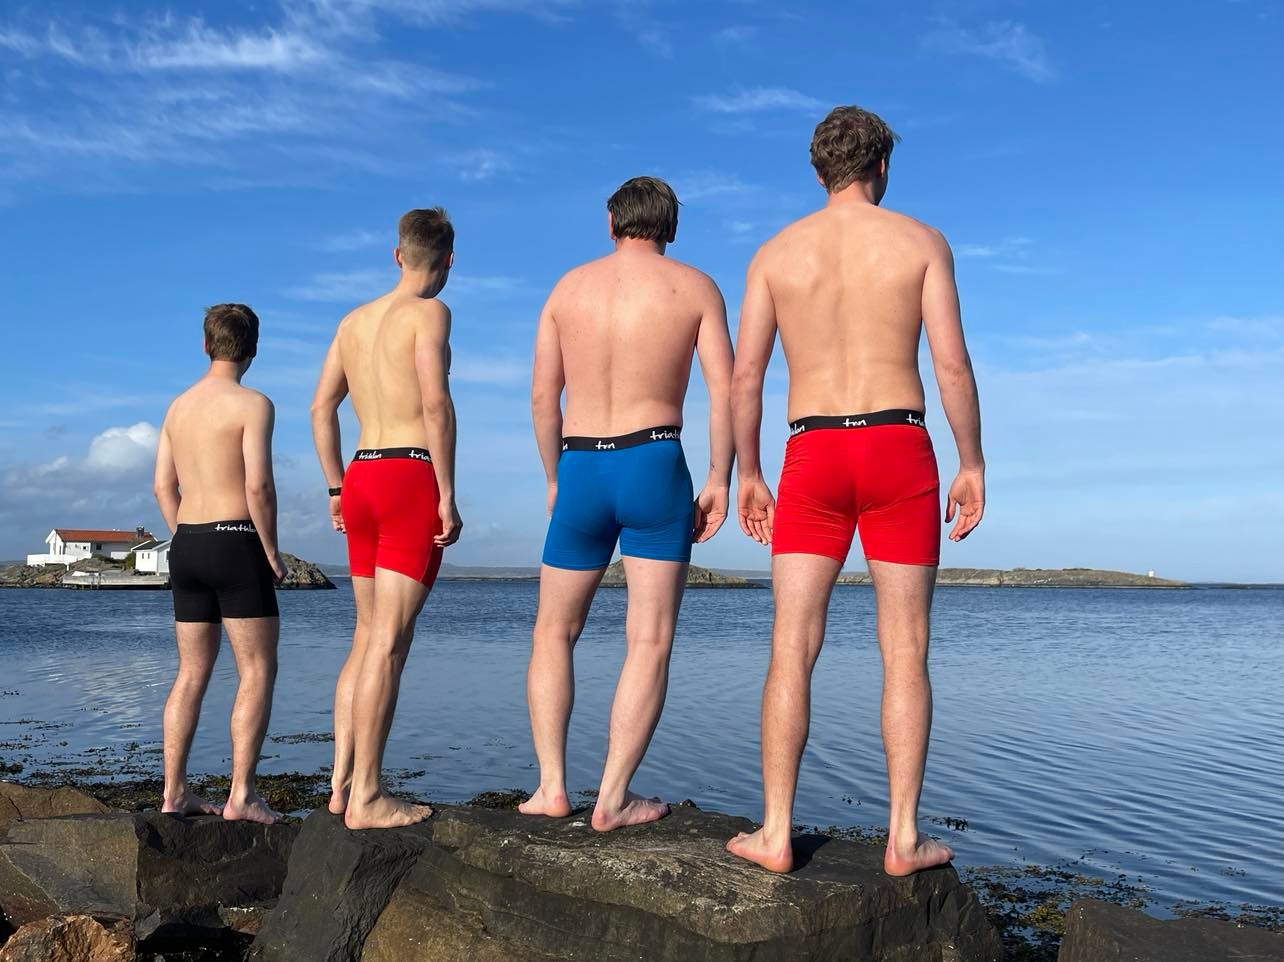 Four men in swimwear standing on a rocky shore facing the sea.